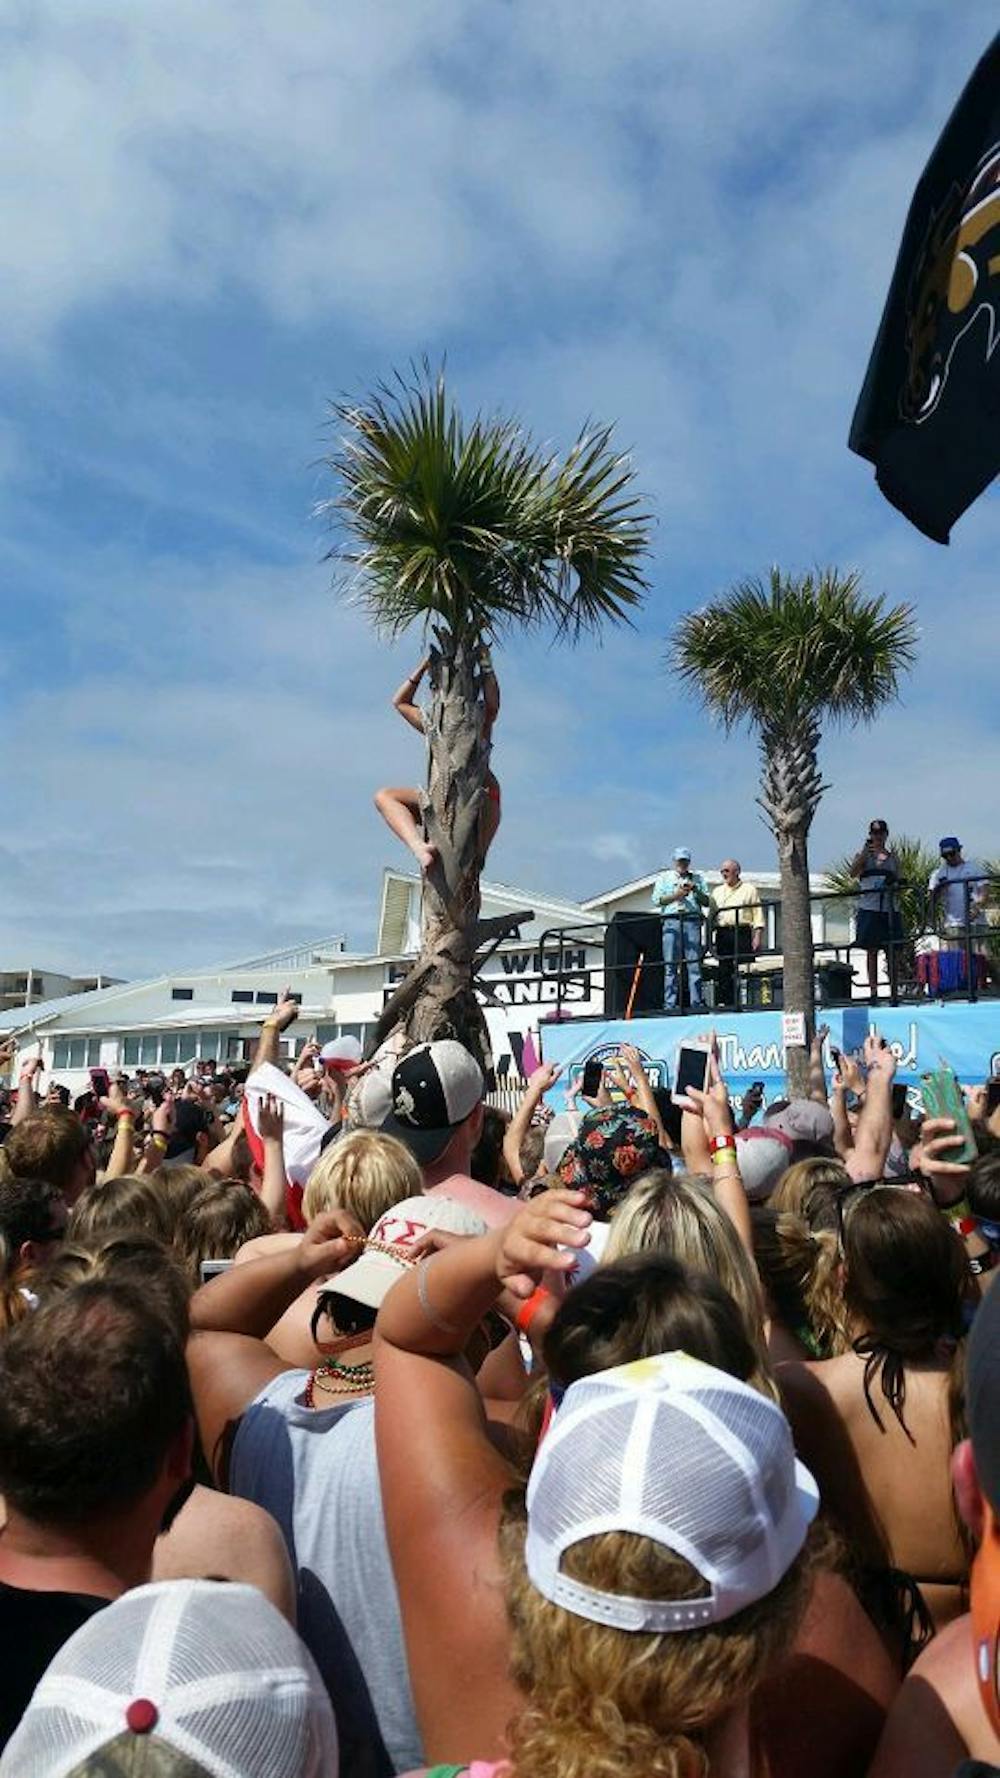 <p class="p1">Spring breakers crowd around a Luke Bryan concert for his last annual show at Spinnaker Beach Club in Panama City Beach last spring.</p>